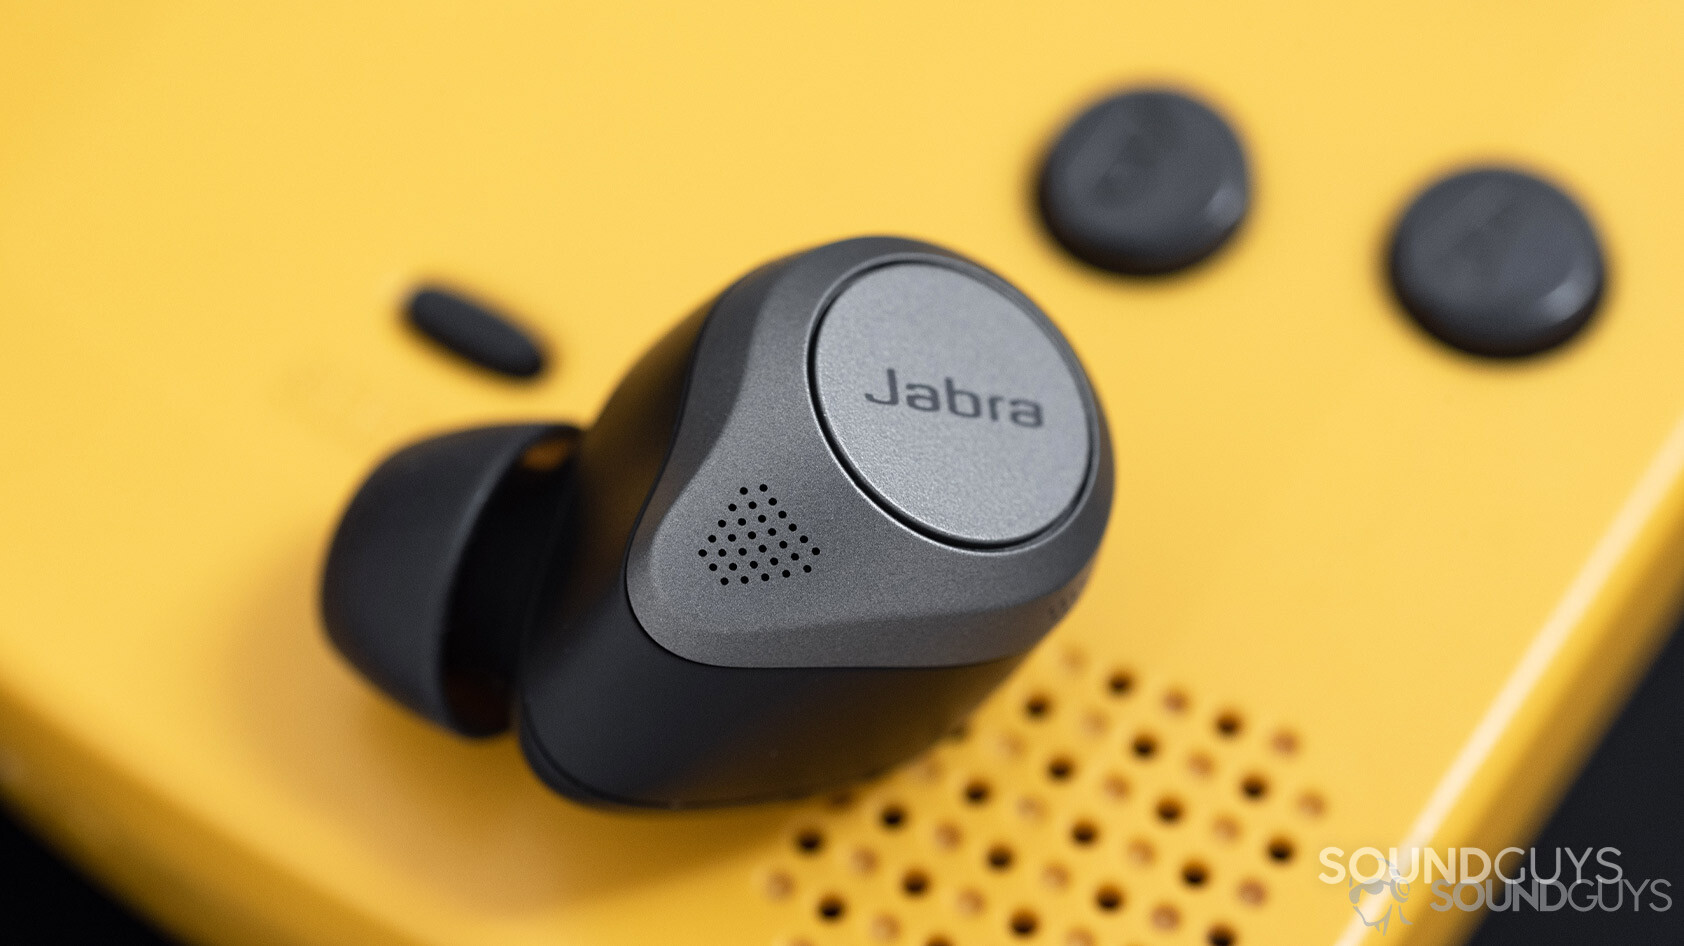 The Jabra Elite 85t noise cancelling true wireless earbuds microphone holes next to a Gameboy Color speaker grill.